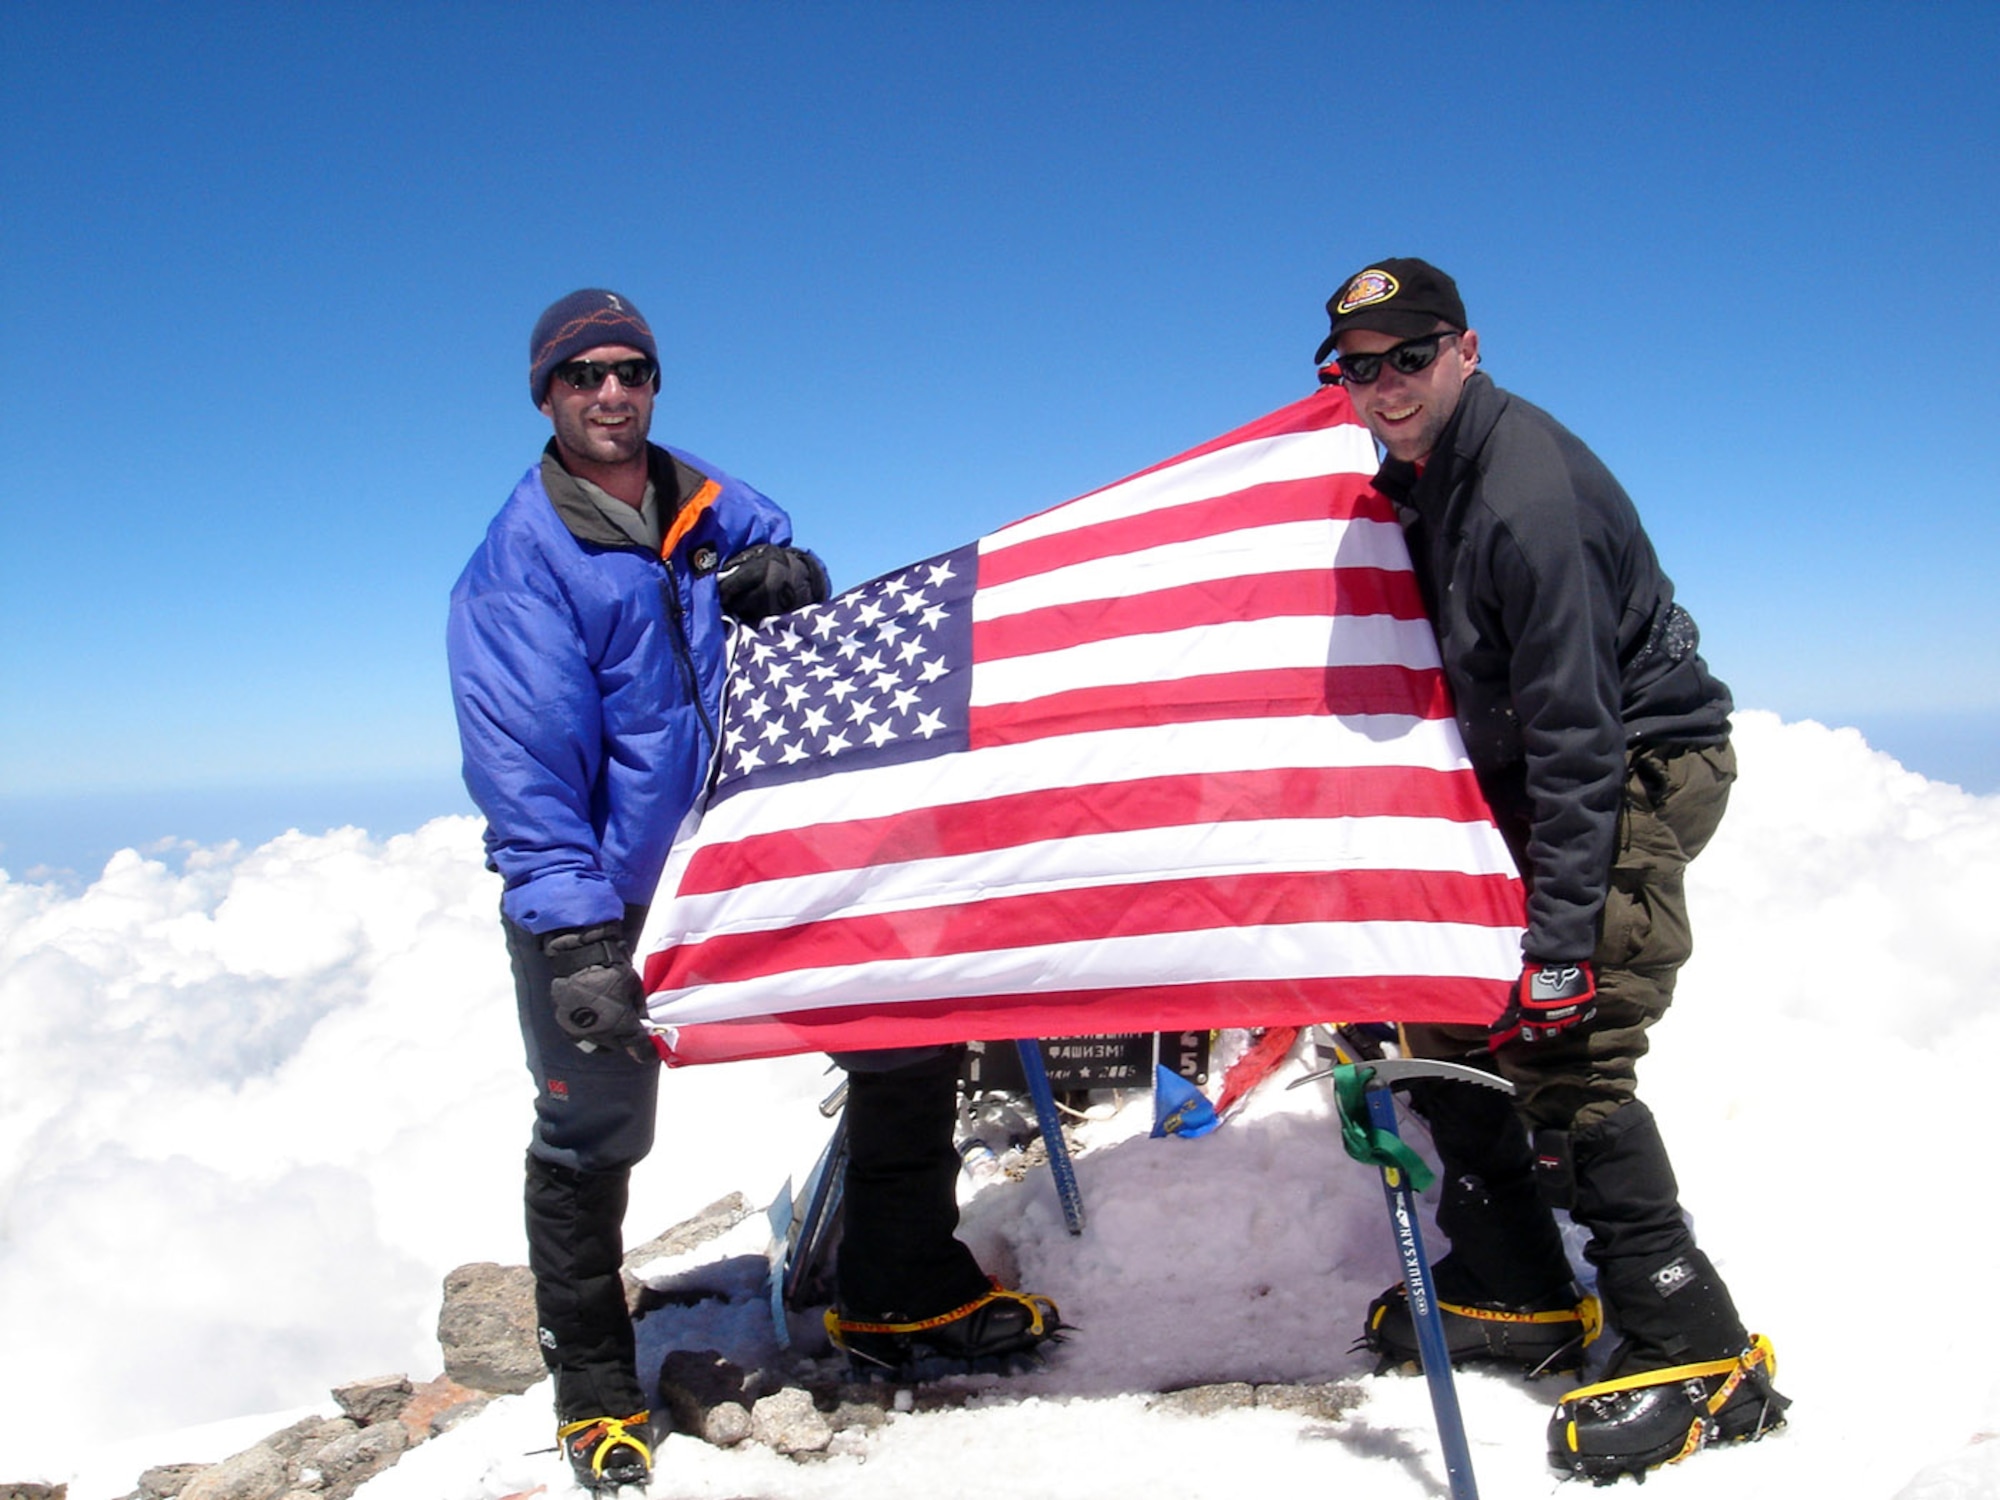 MOUNT ELBRUS, Russia -- First Lt. Mark Uberuaga (left) and Capt. Rob Marshall proudly display the American flag after reaching the summit of Mount Elbrus.  Lieutenant Uberuaga is assigned to the 21st Special Operations Squadron, and Captain Marshall is assigned to the 67th Special Operations Squadron.  Both are from Royal Air Force Mildenhall, England.  (U.S. Air Force photo)